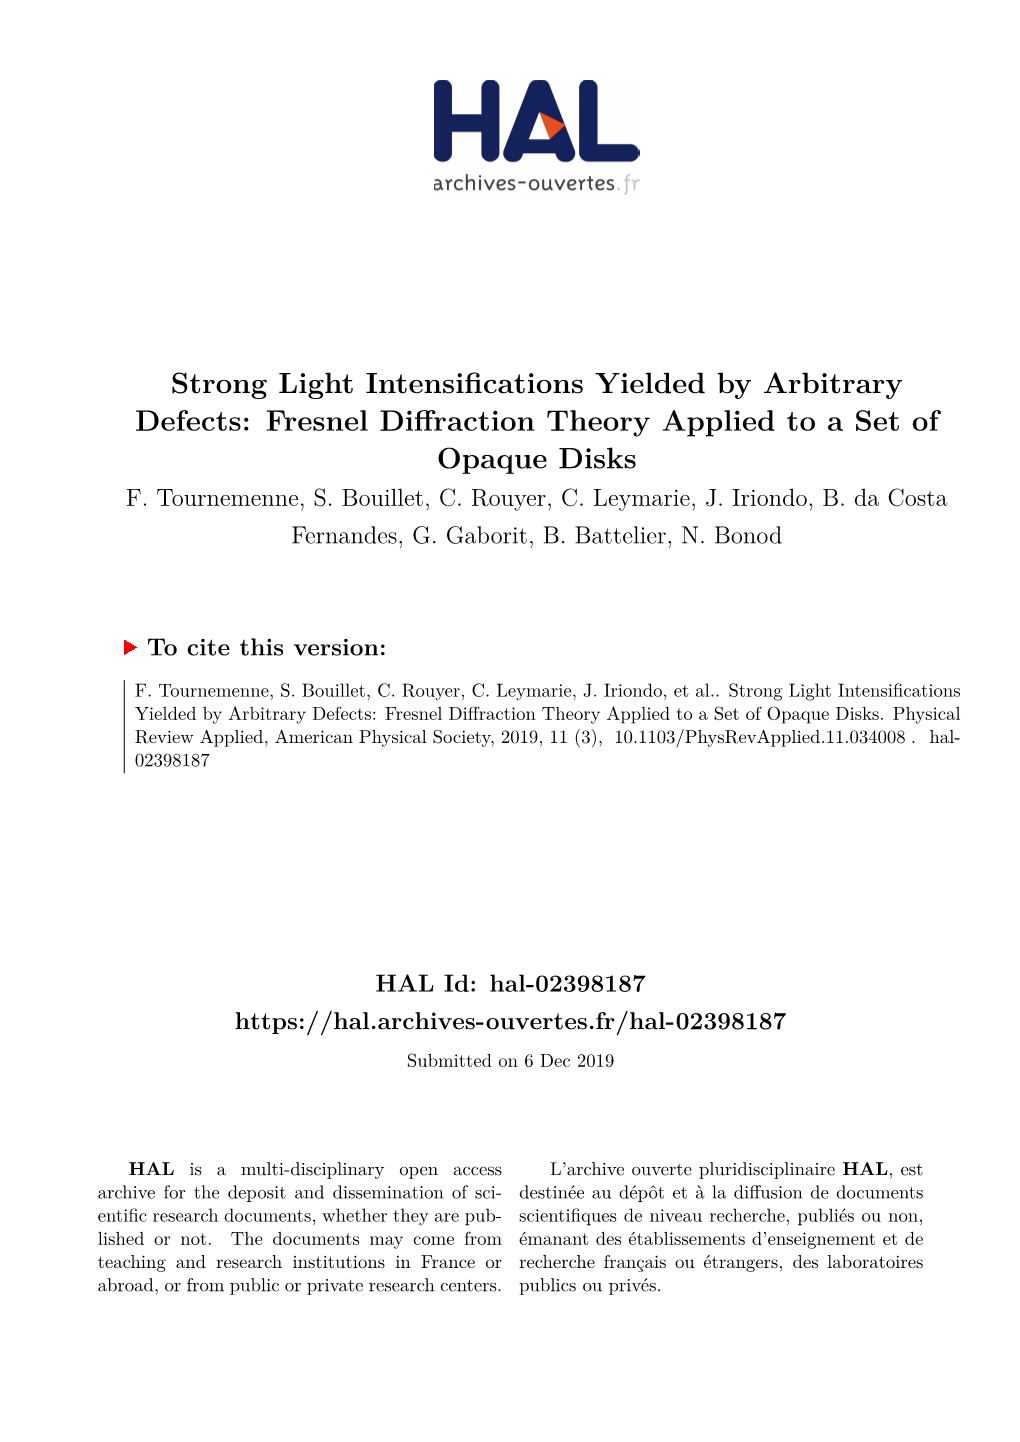 Strong Light Intensifications Yielded by Arbitrary Defects: Fresnel Diffraction Theory Applied to a Set of Opaque Disks F